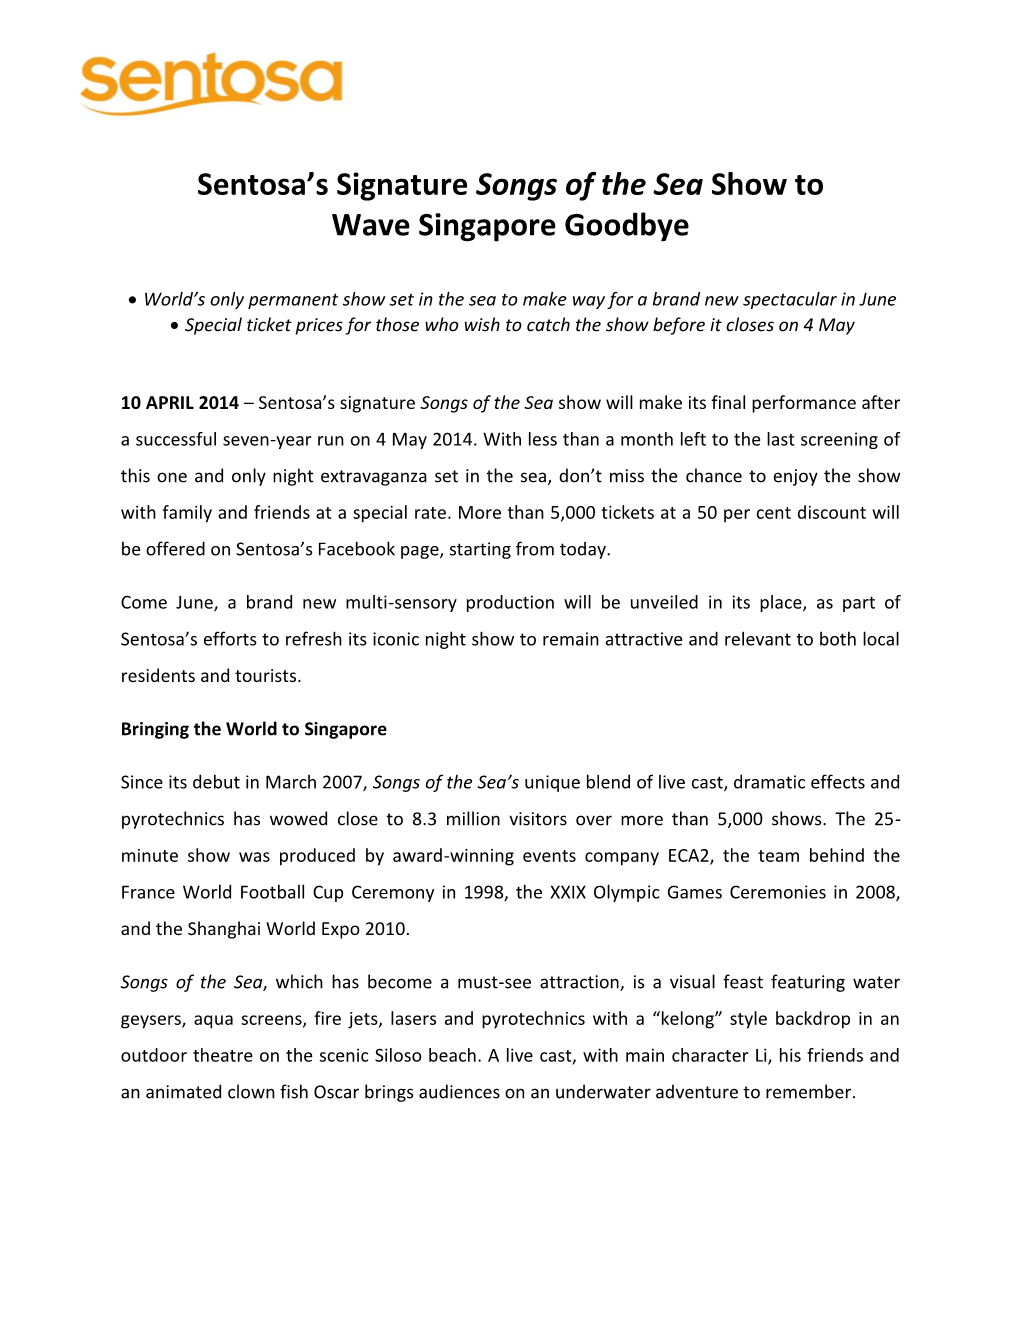 NEWS Sentosa's Signature Songs of the Sea Show to Wave Singapore Goodbye 10 APR 2014